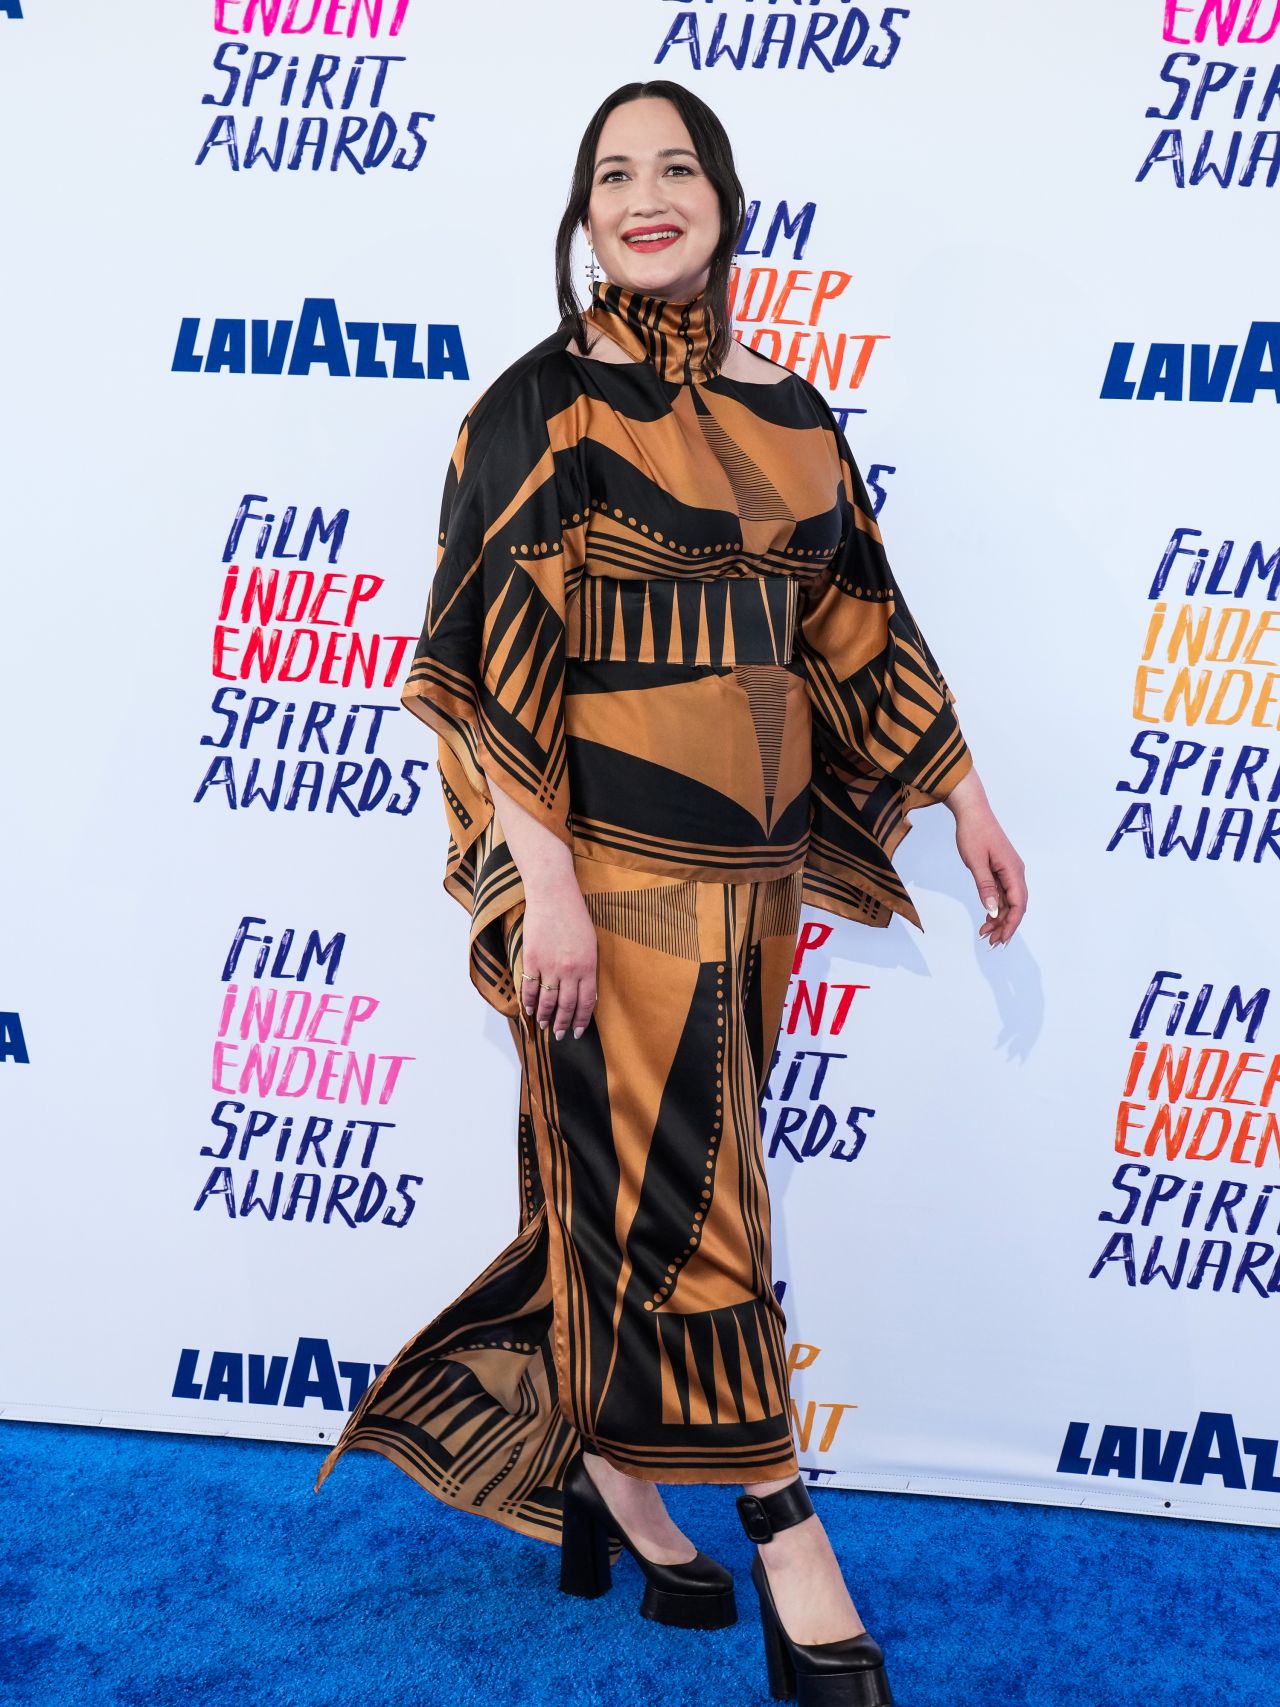 LILY GLADSTONE AT INDEPENDENT SPIRIT AWARDS IN SANTA MONICA